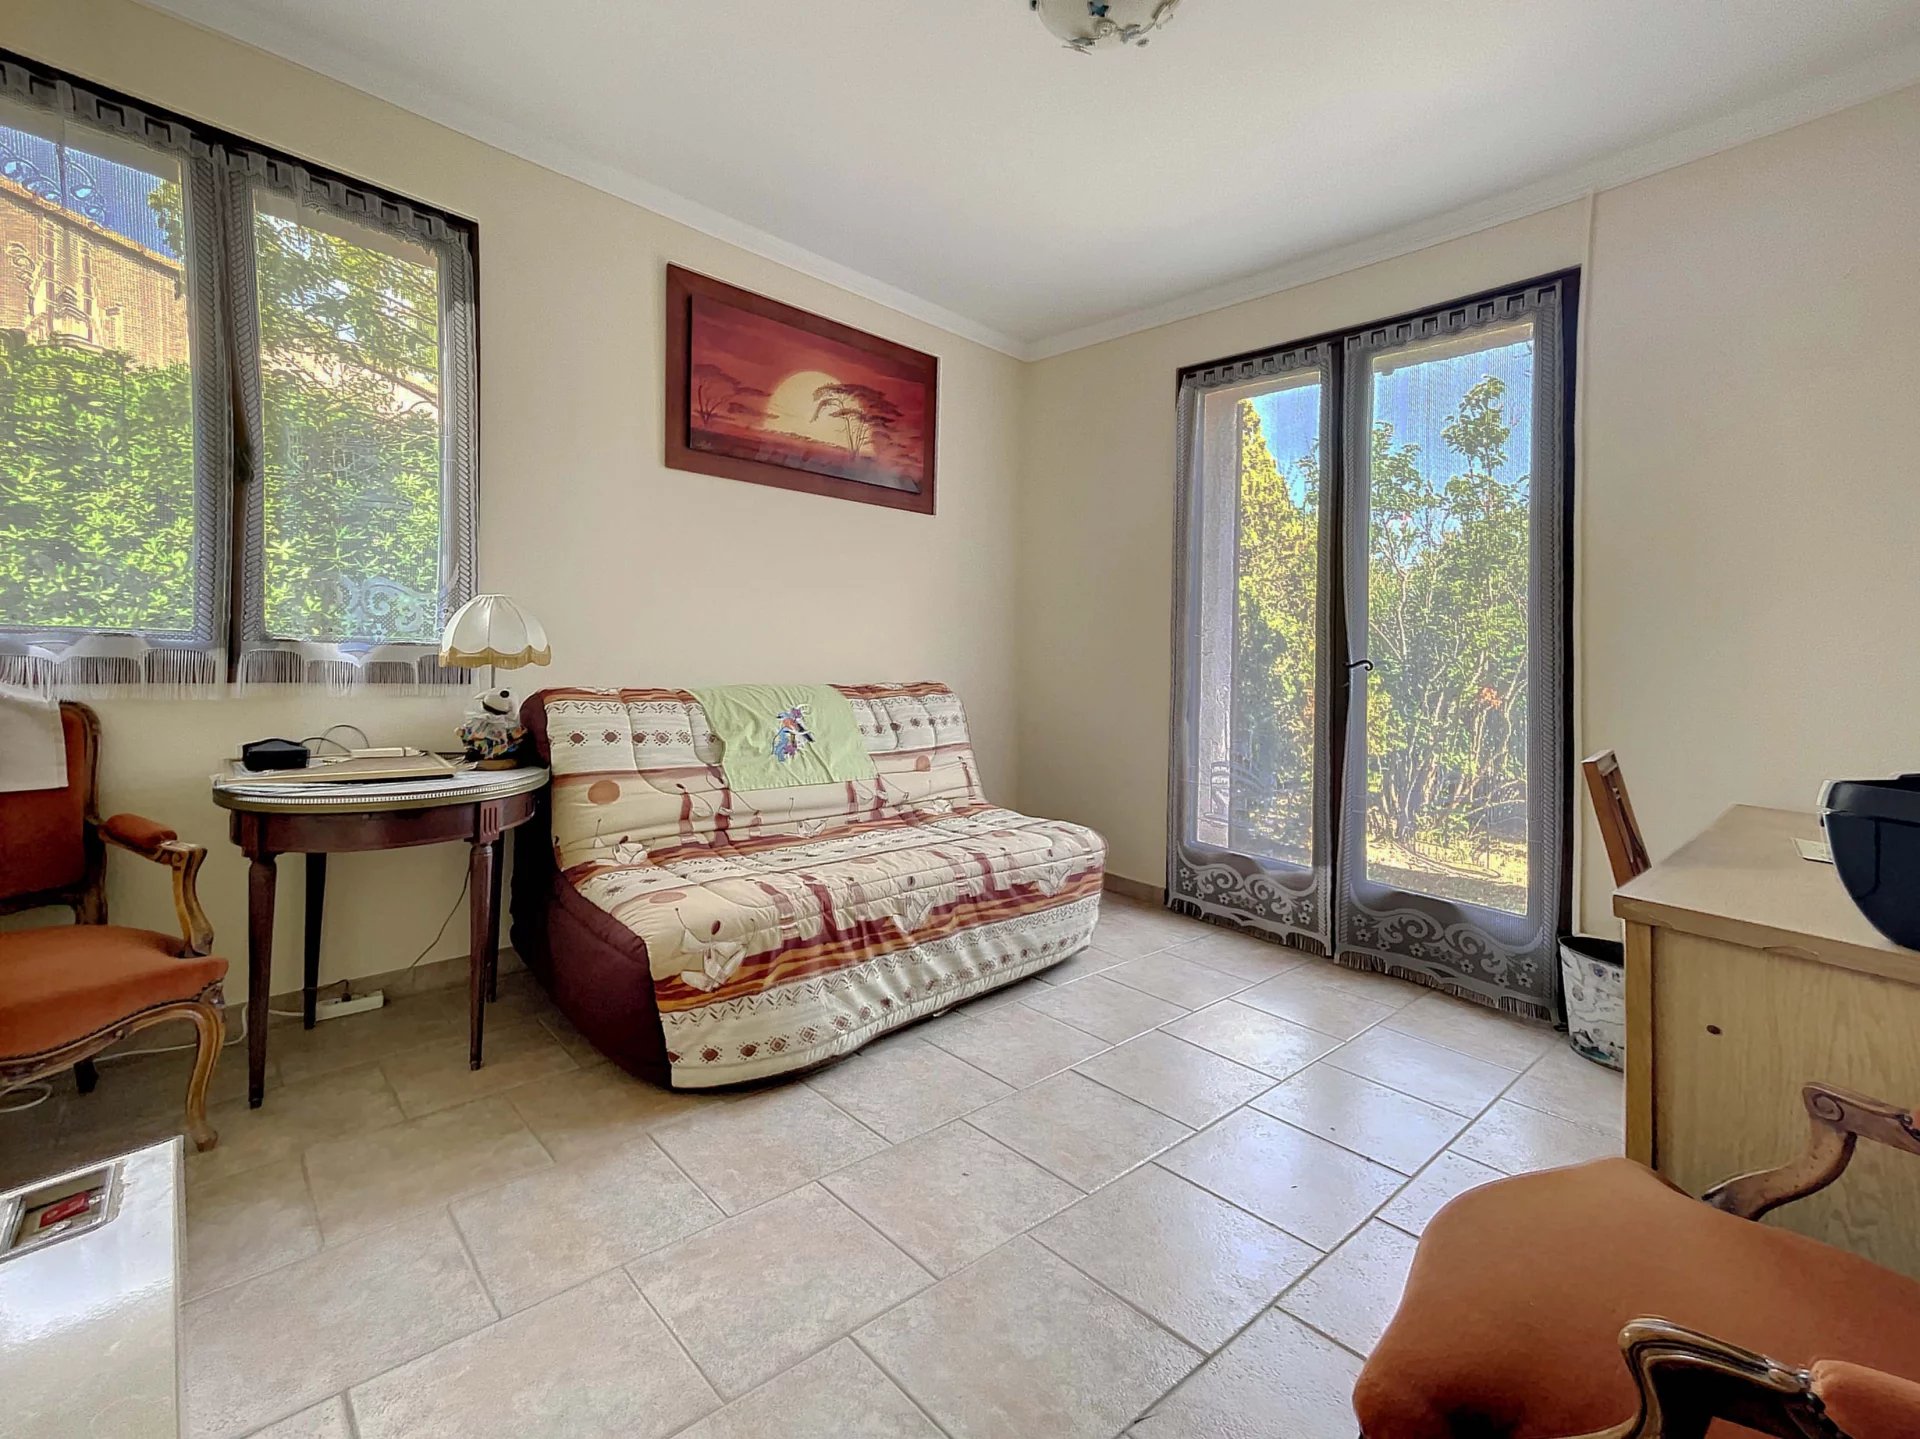 Antibes-  For sale  4 bedroom villa with an independant 1 bedroom apartment